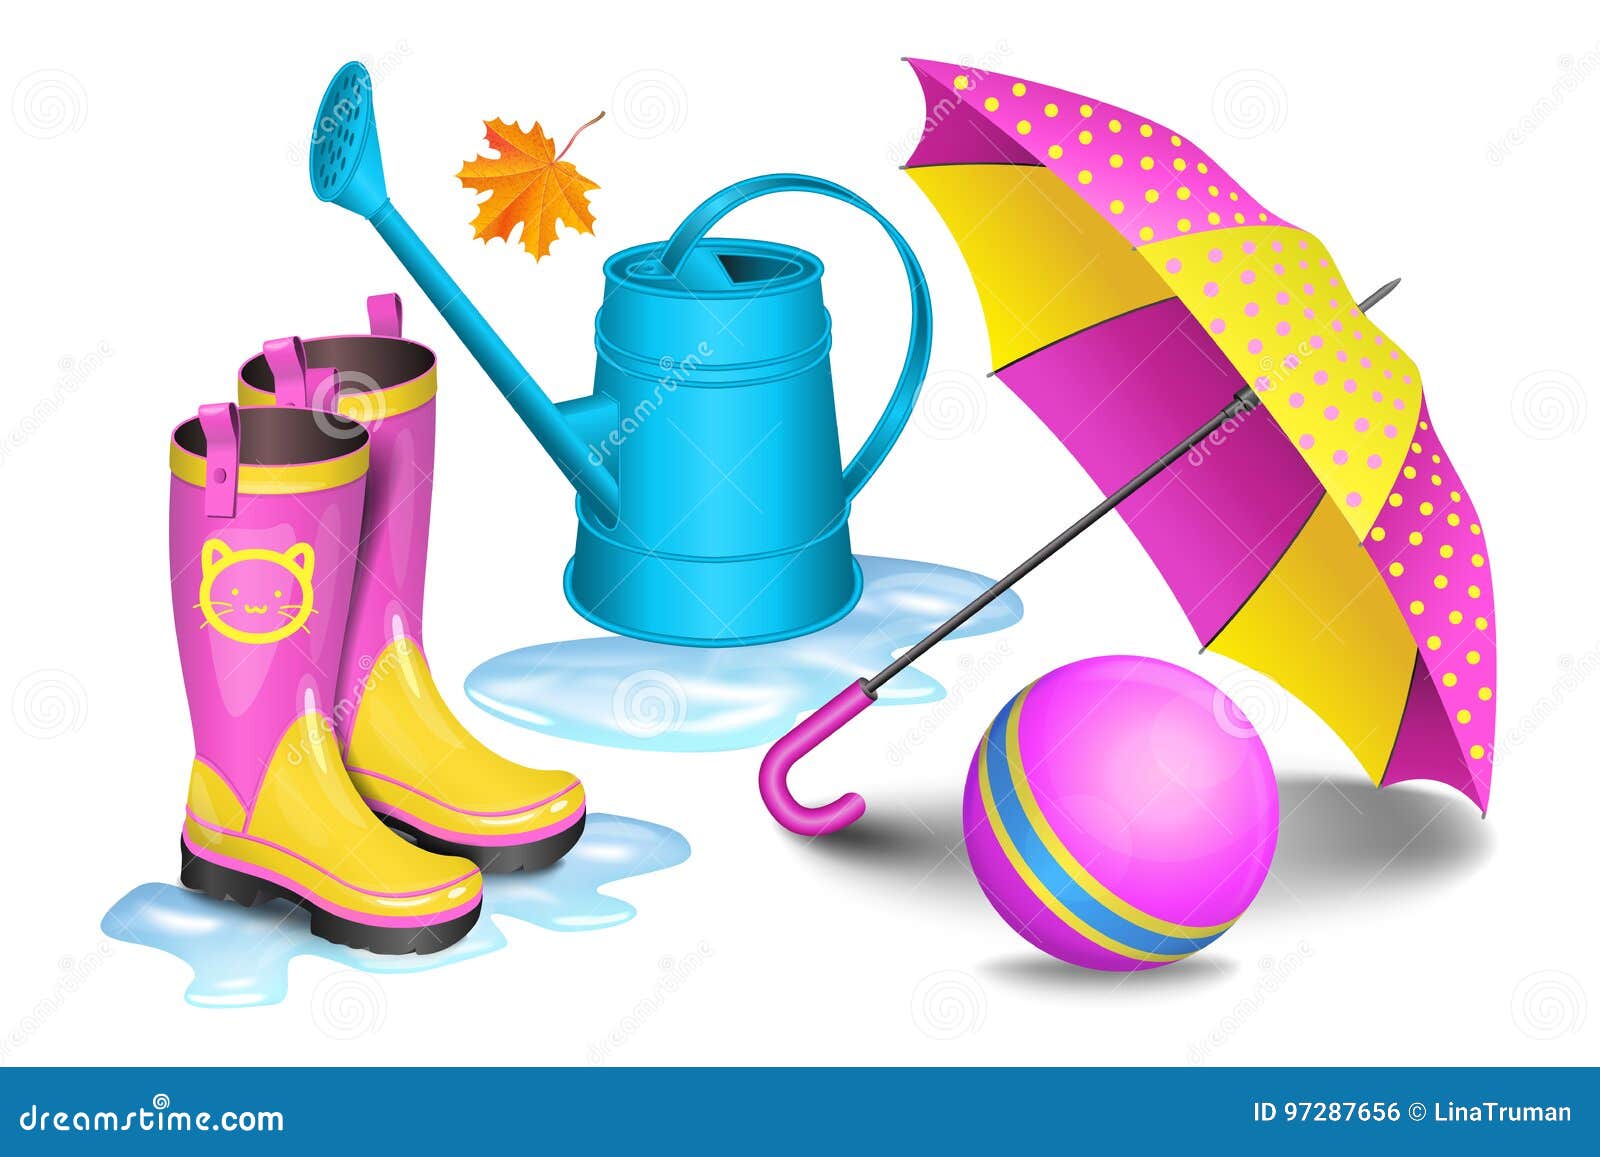 pink-yellow gumboots in puddles, children umbrella, blue can